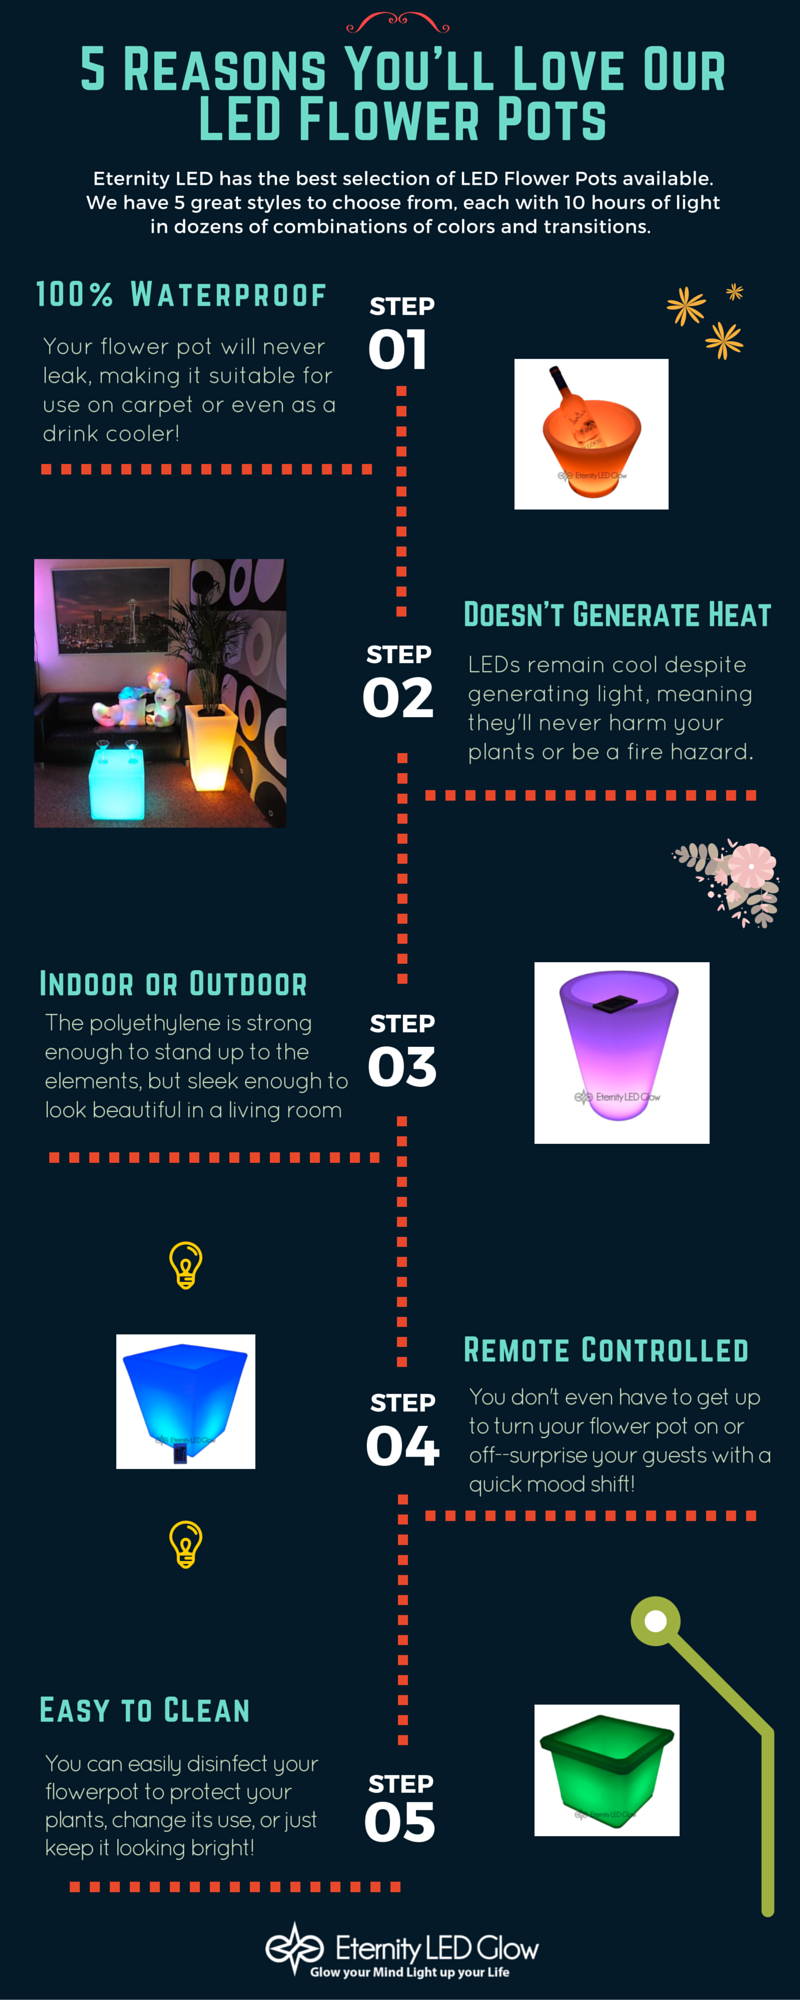 5 reasons you'll love our LED flower pots